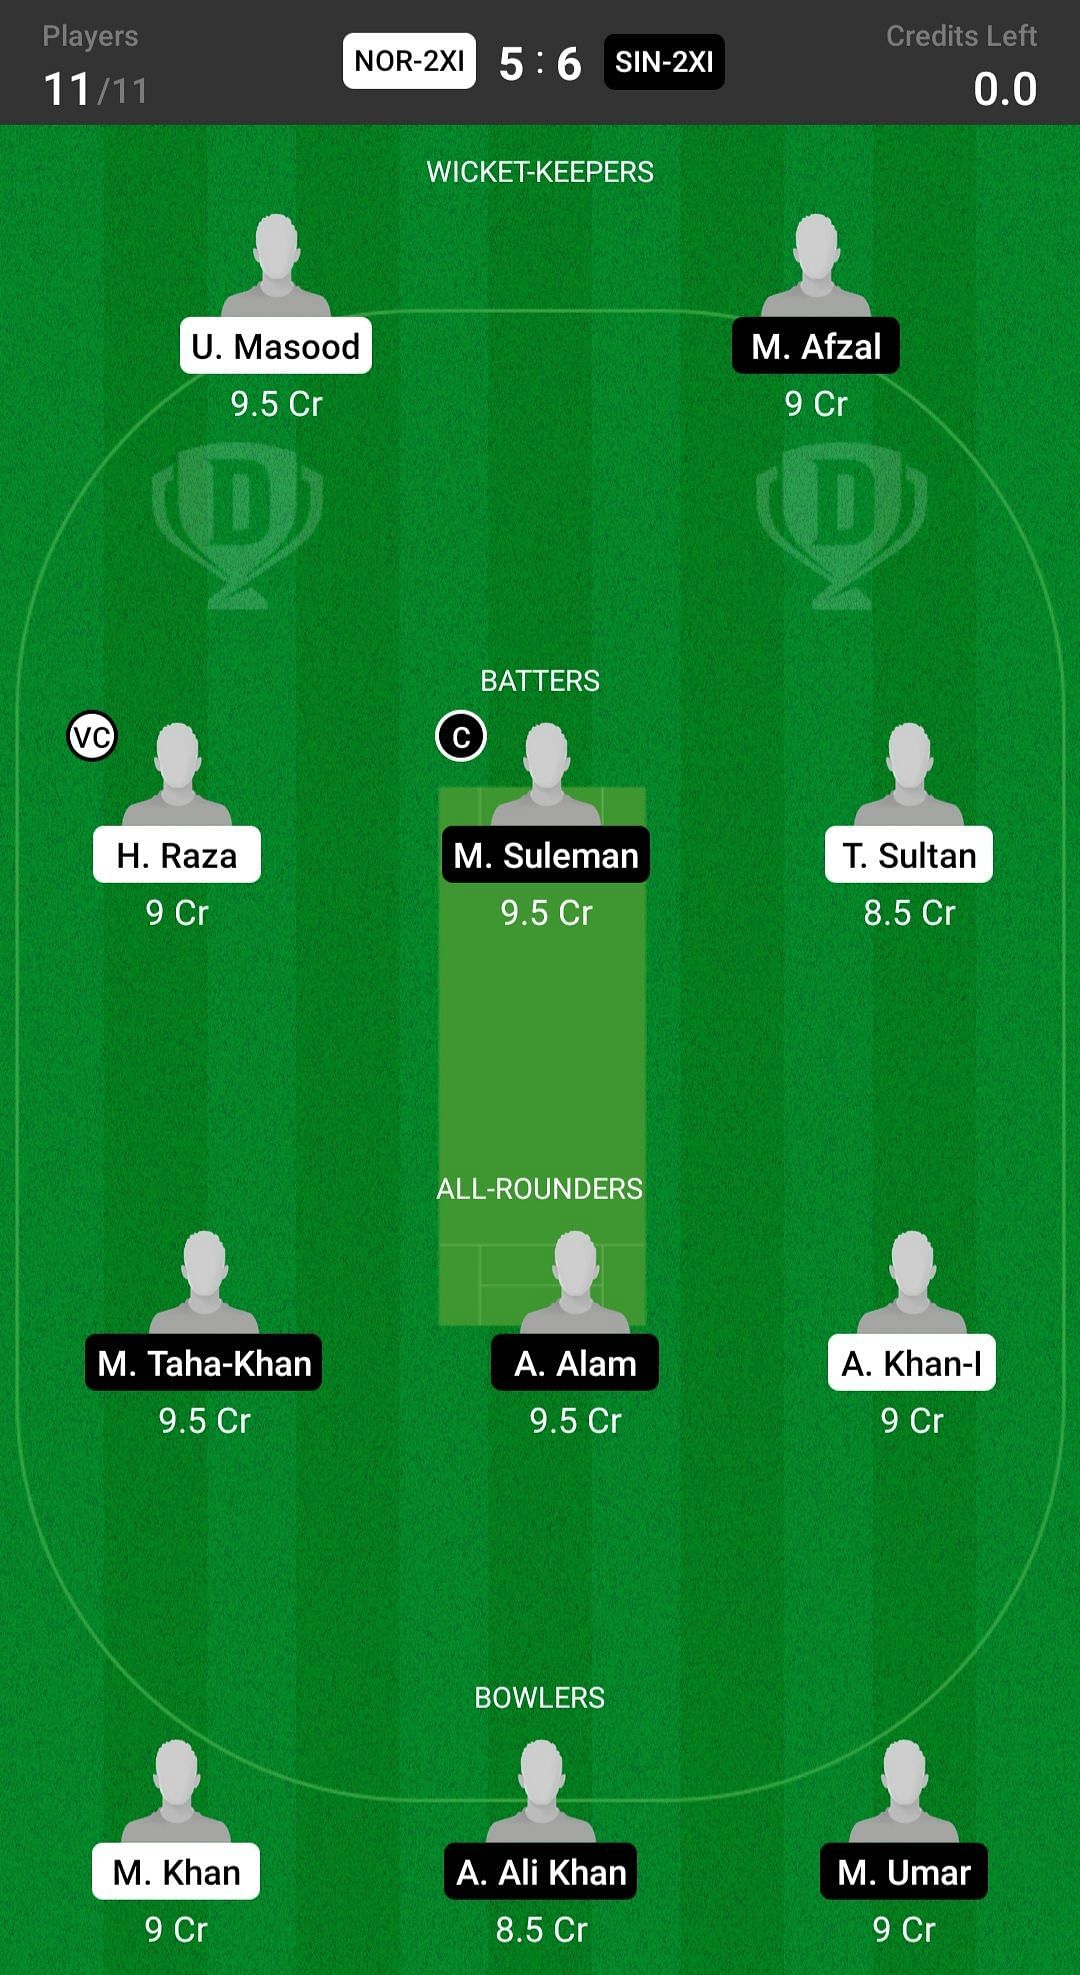 Sindh 2nd XI vs Northern 2nd XI Fantasy suggestion #1